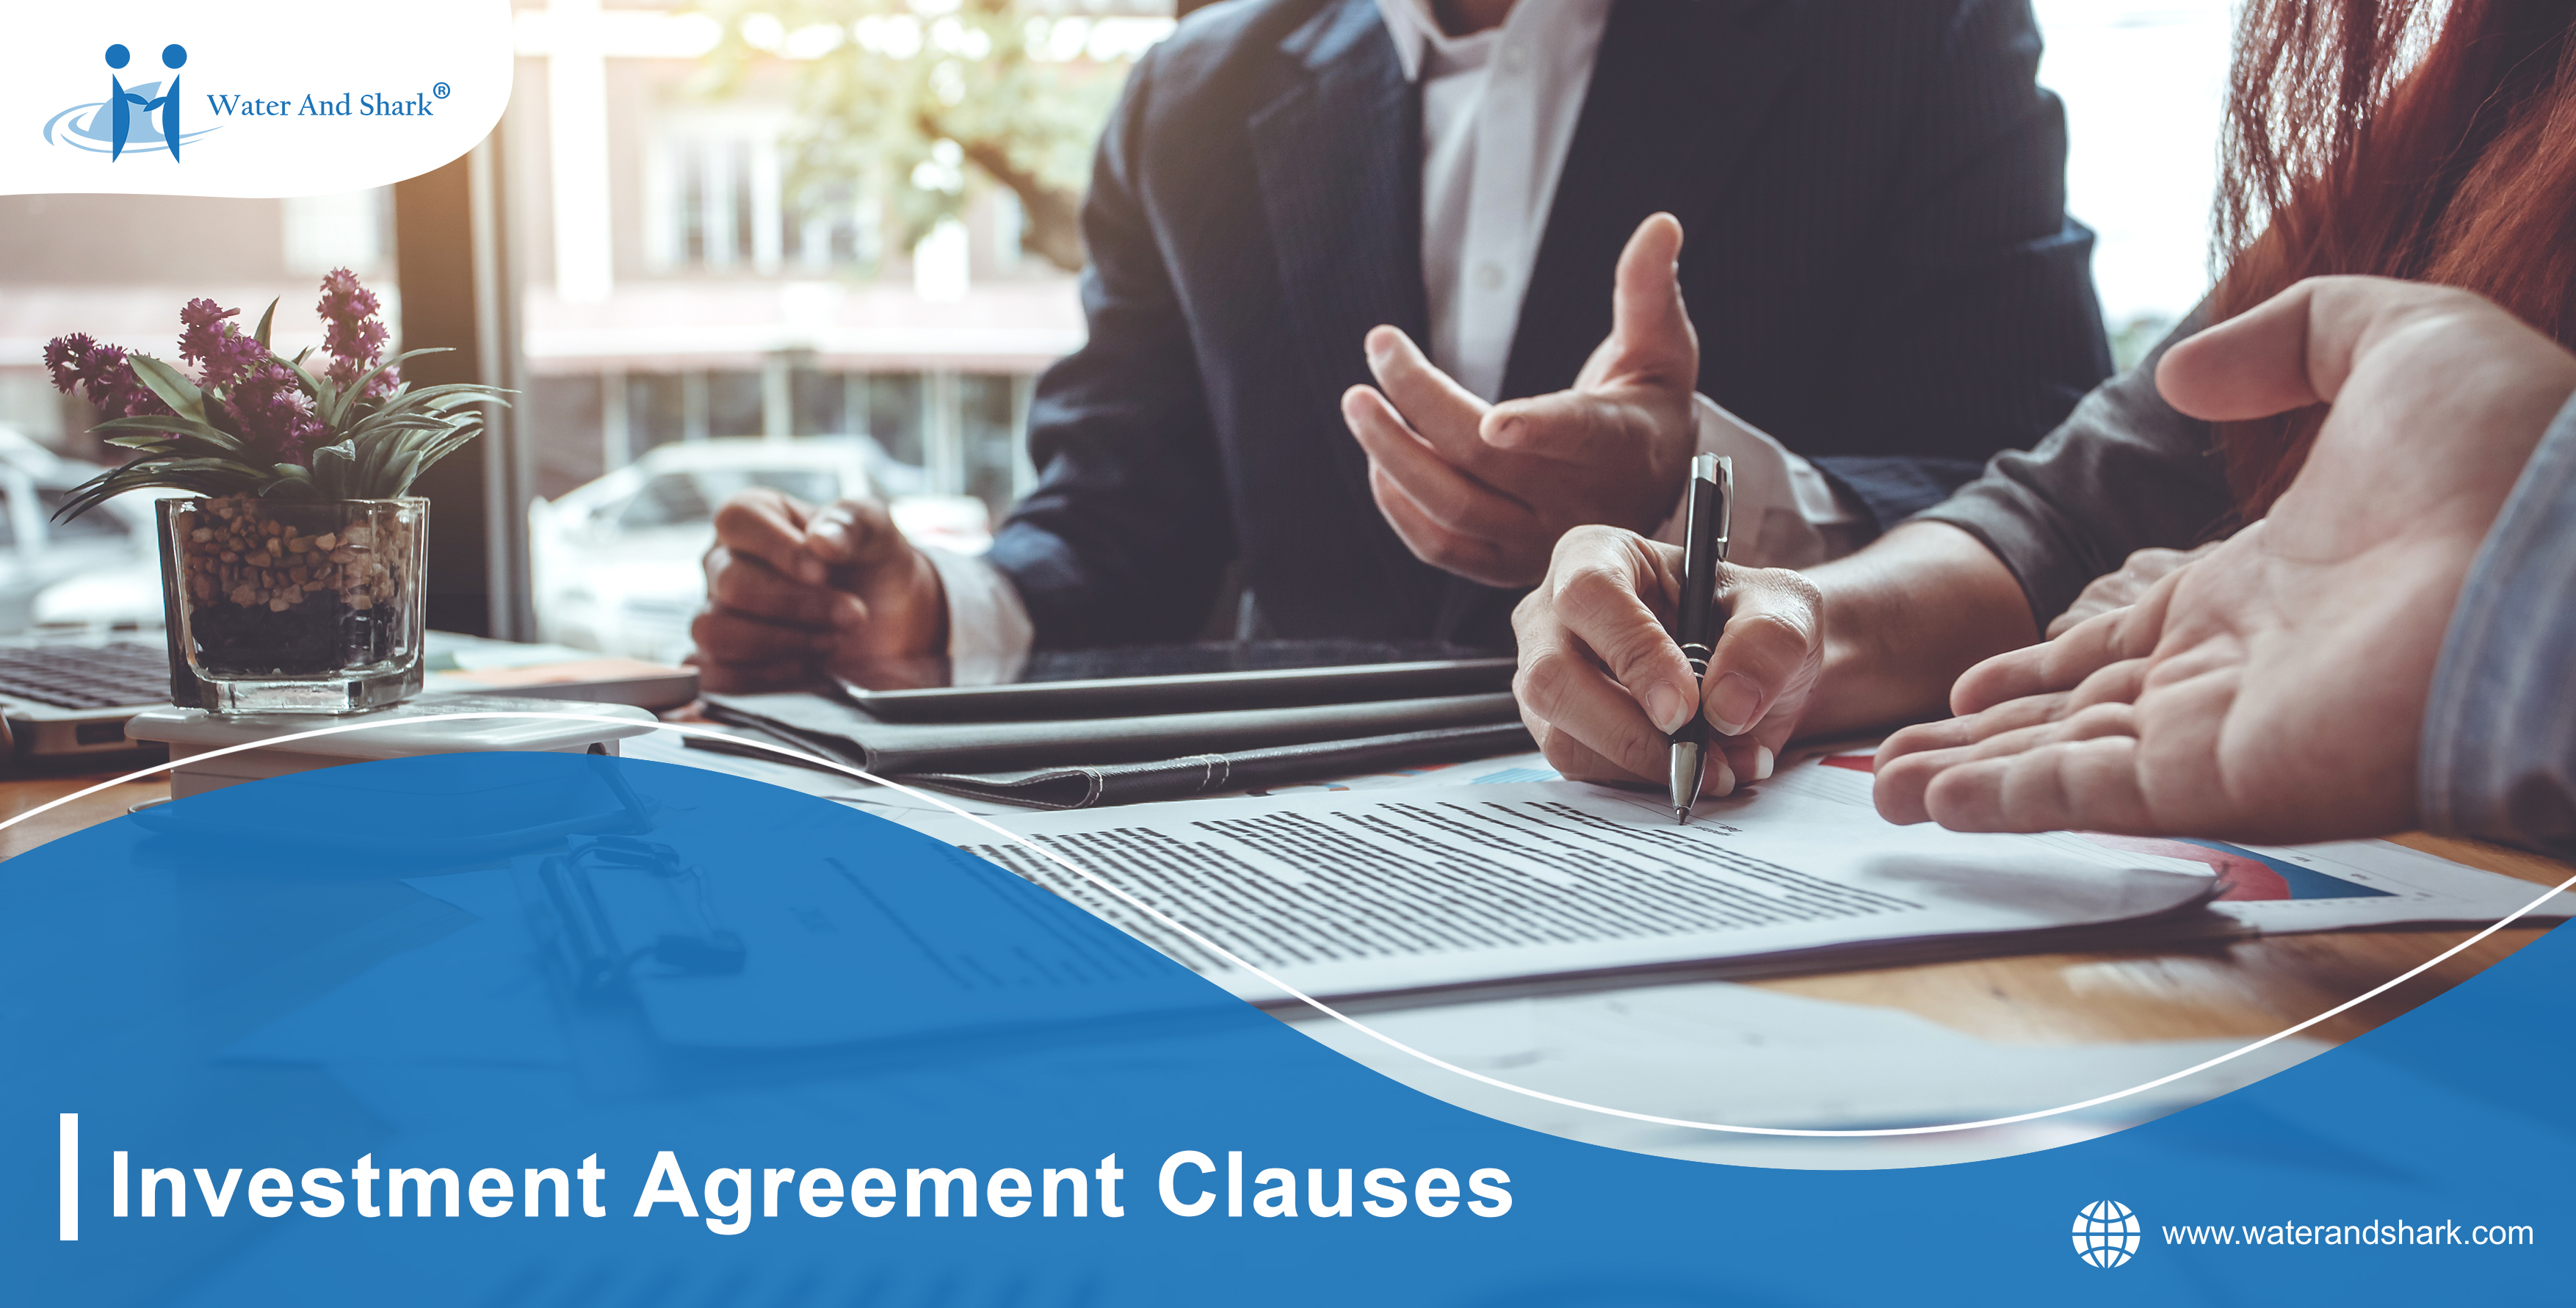 Investment_Agreement_Clauses_650x1280.jpg